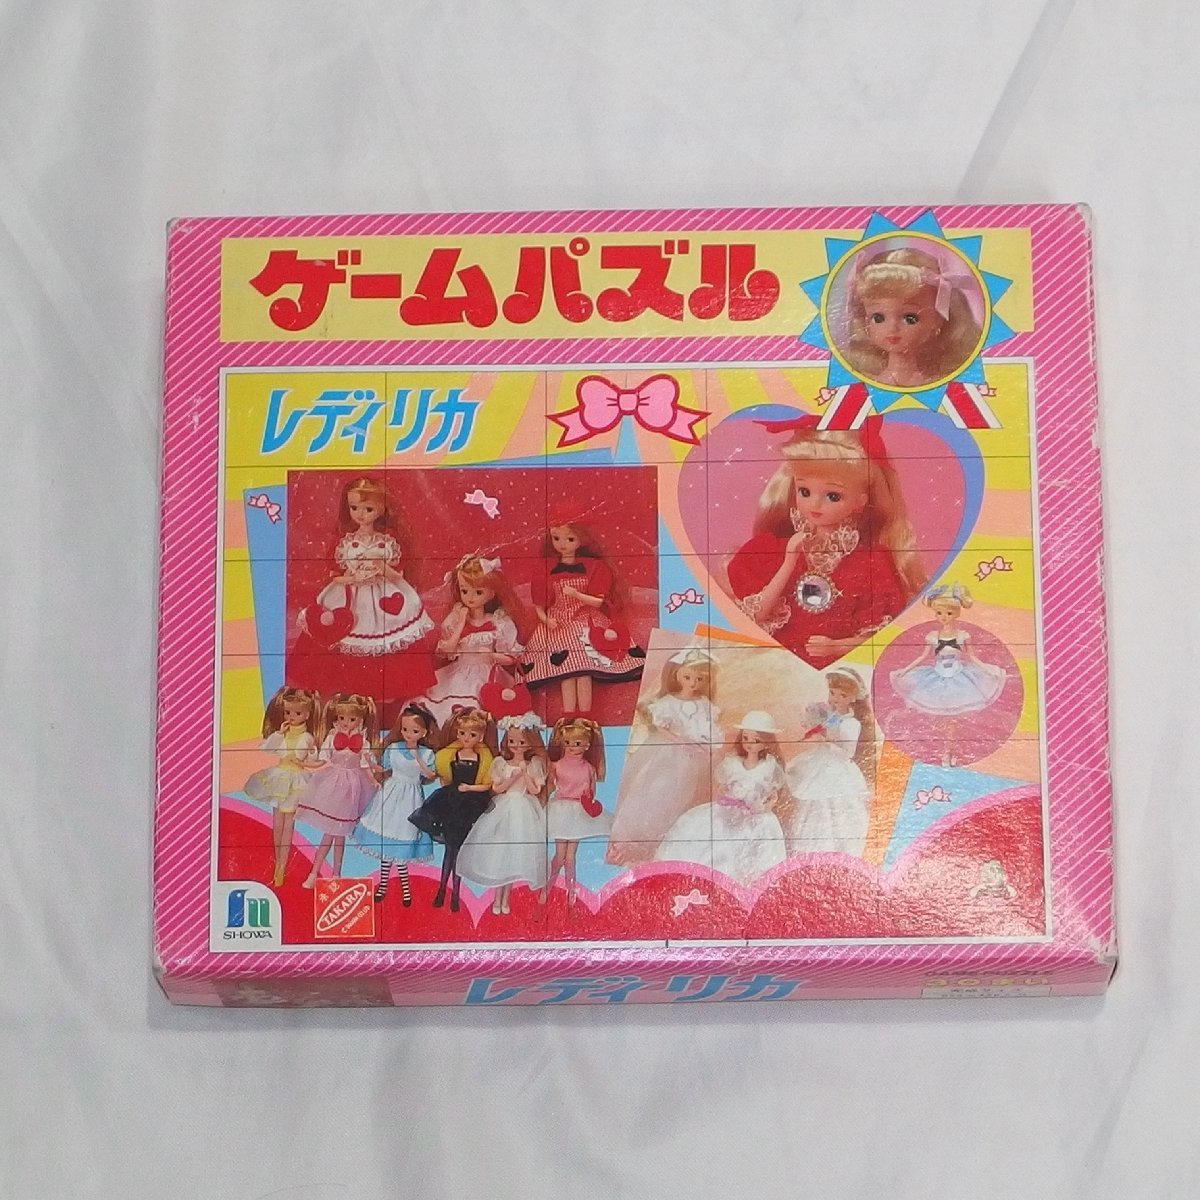  Licca-chan * Takara approval Licca-chan reti licca game puzzle Showa Note (30 sheets * finished size 625.×456.)* origin boxed * that time thing 